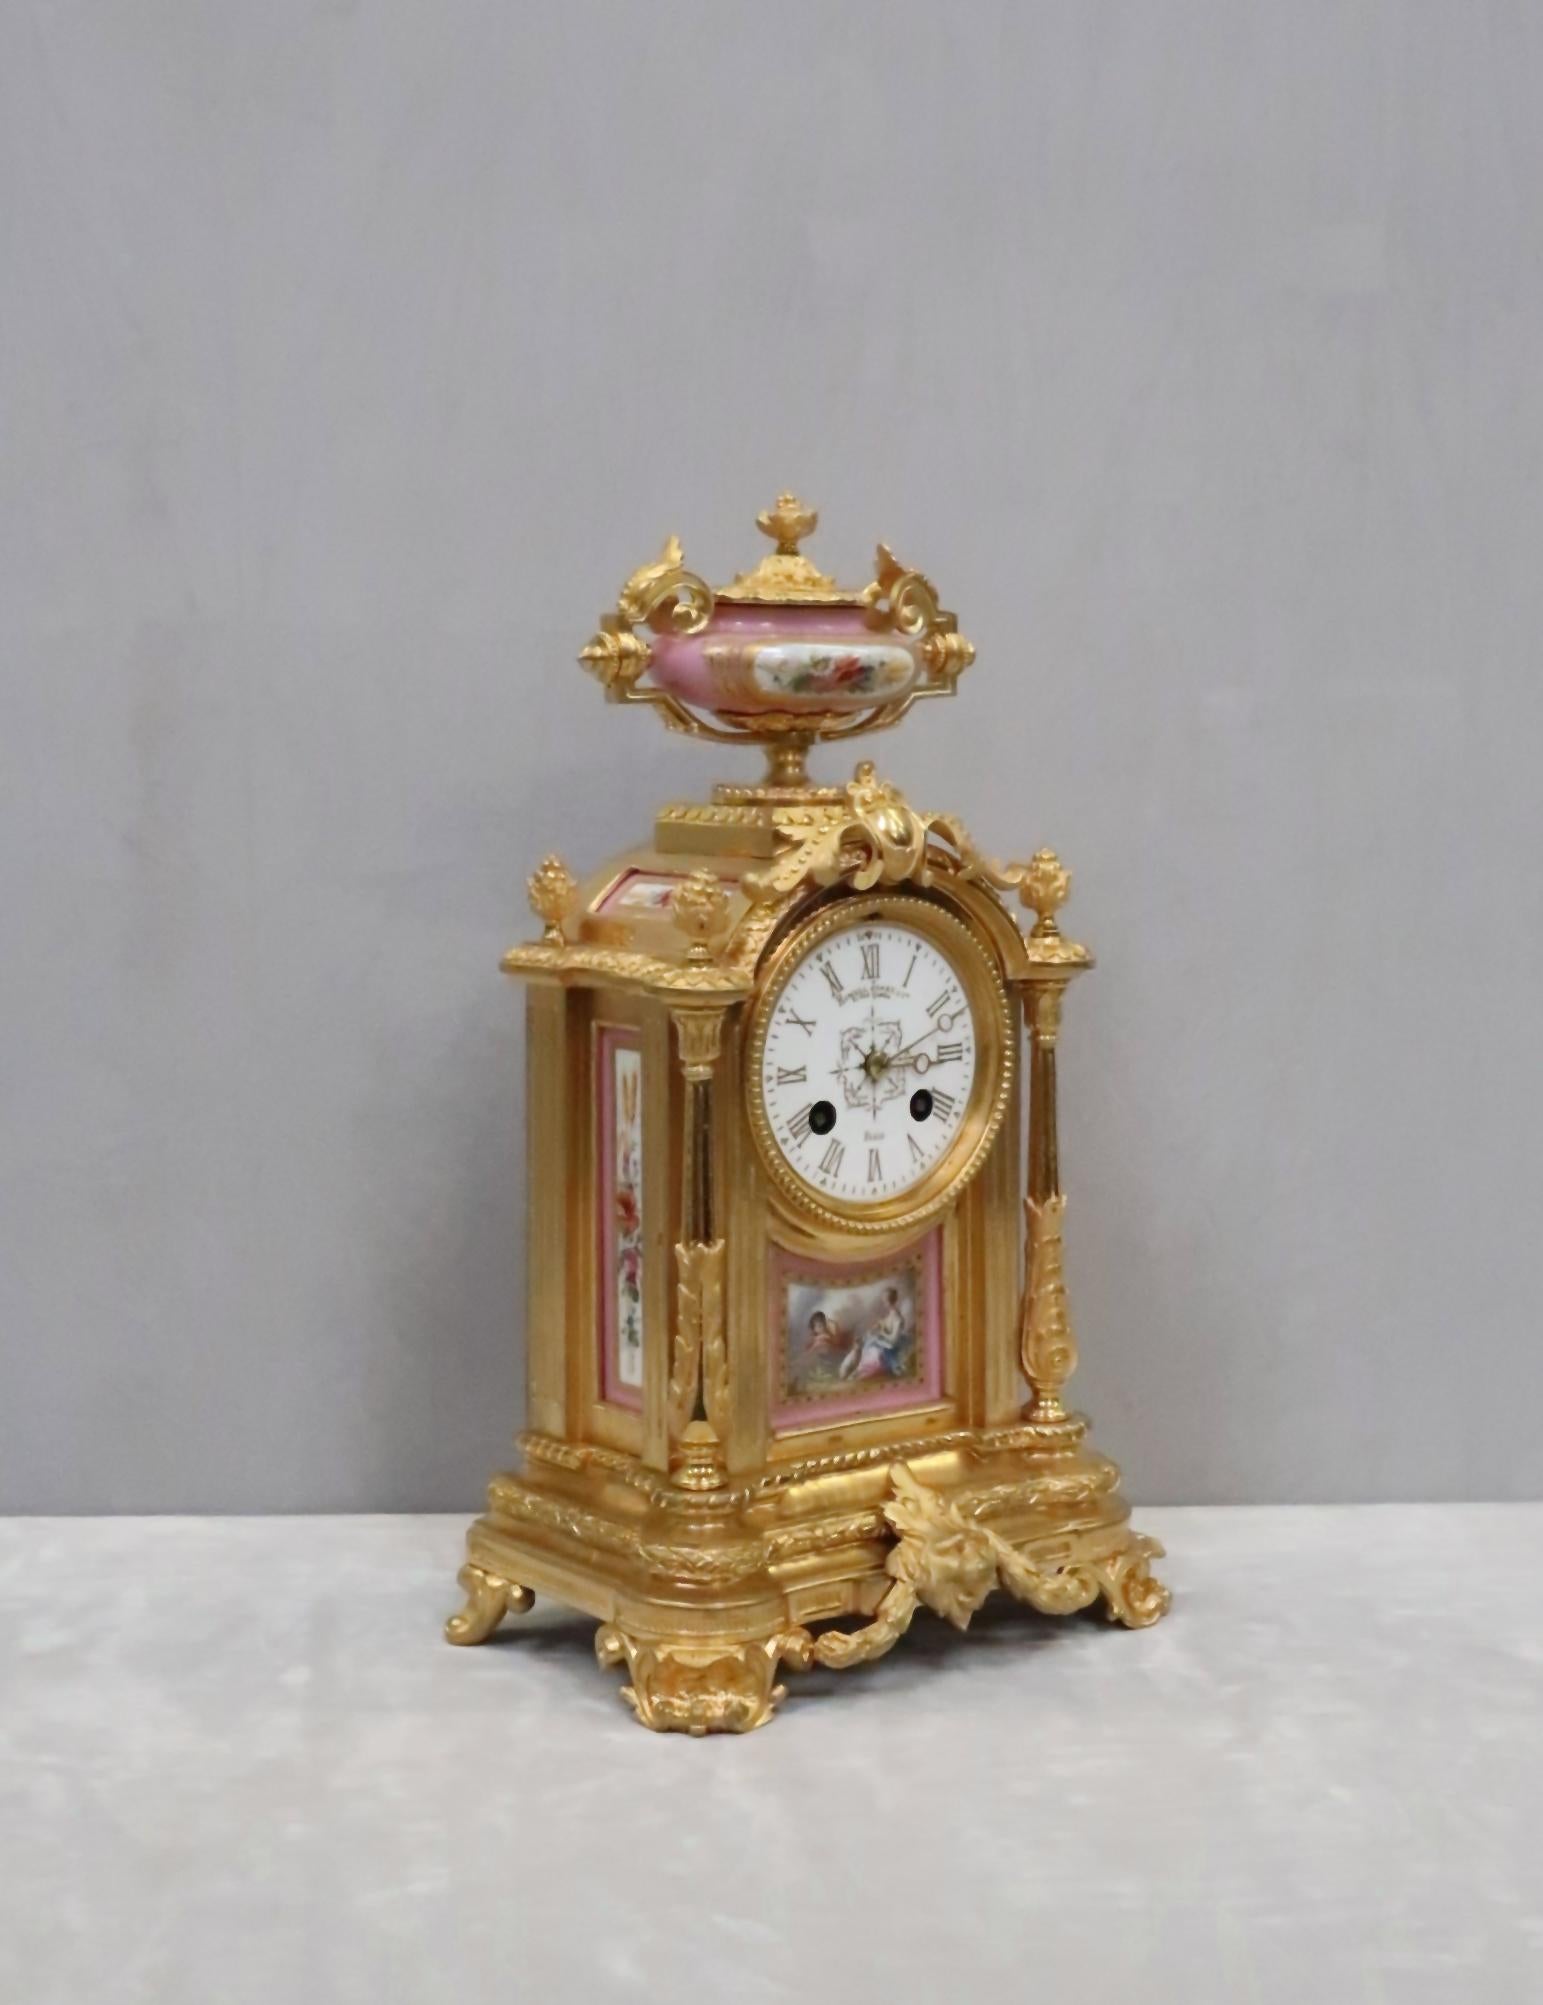 An extremely good quality French Napoleon III, Louis XIV style finely cast bronze gilt mantel clock with foliate design throughout, tapering reeded columns and masked mount stood on 'c' scroll feet finished with pineapple finials and decorative